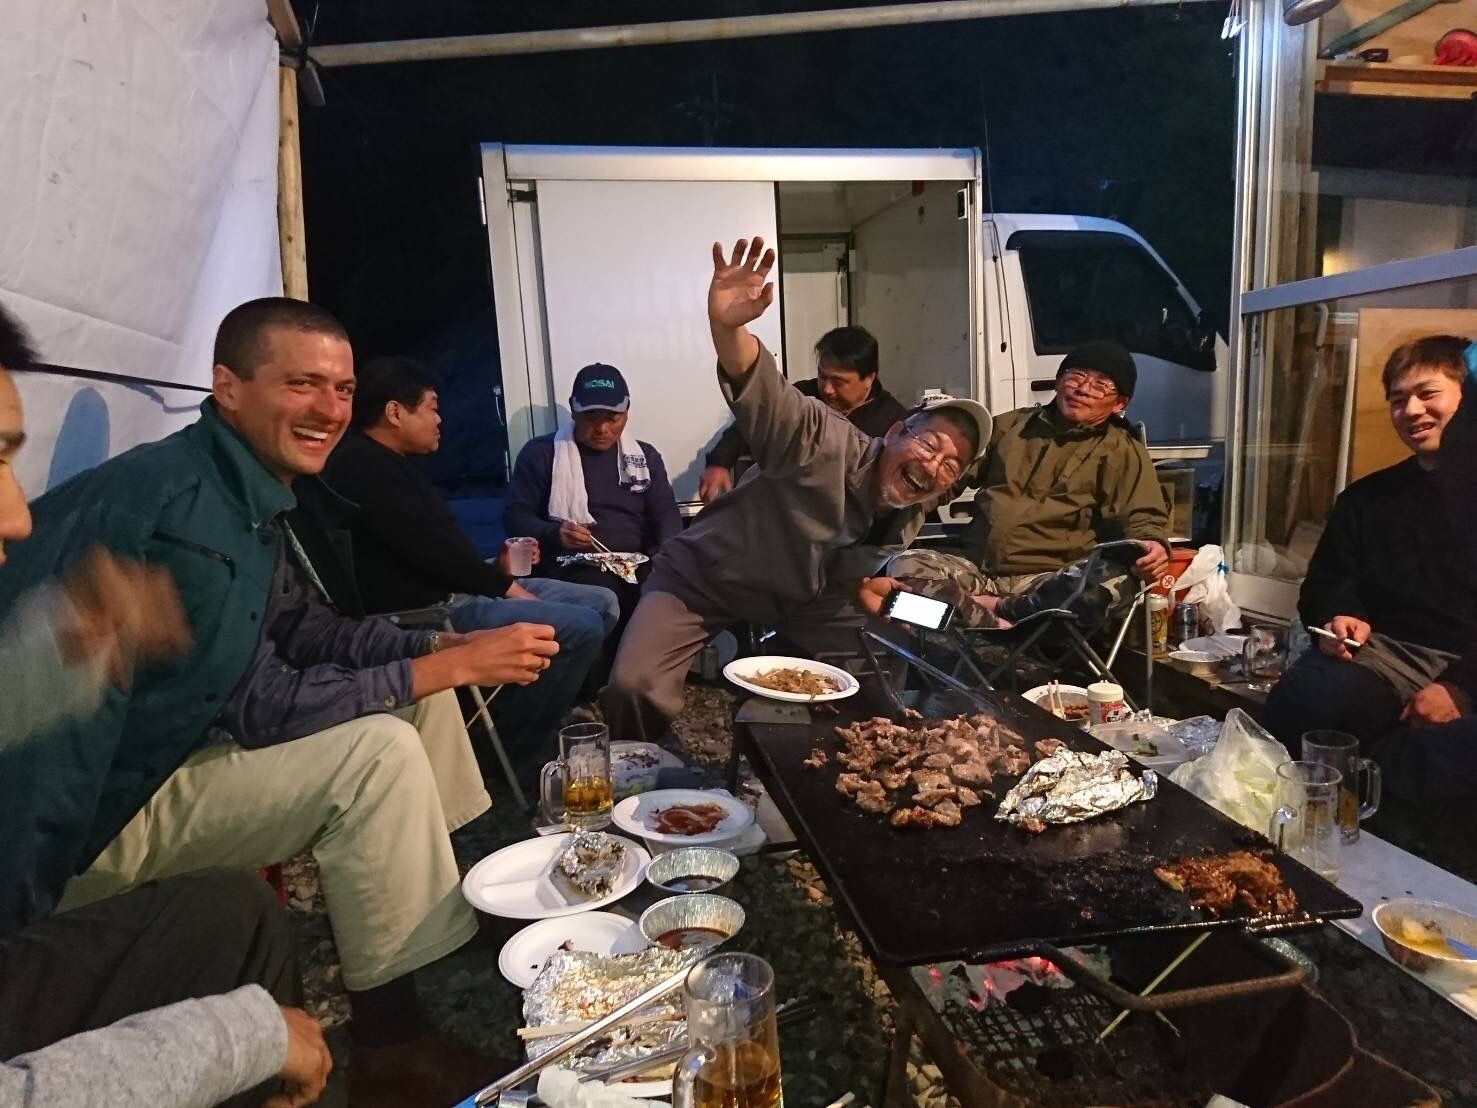 The author with a large group of men sitting around a huge grill with a lot of food, all of them clearly enjoying themselves.